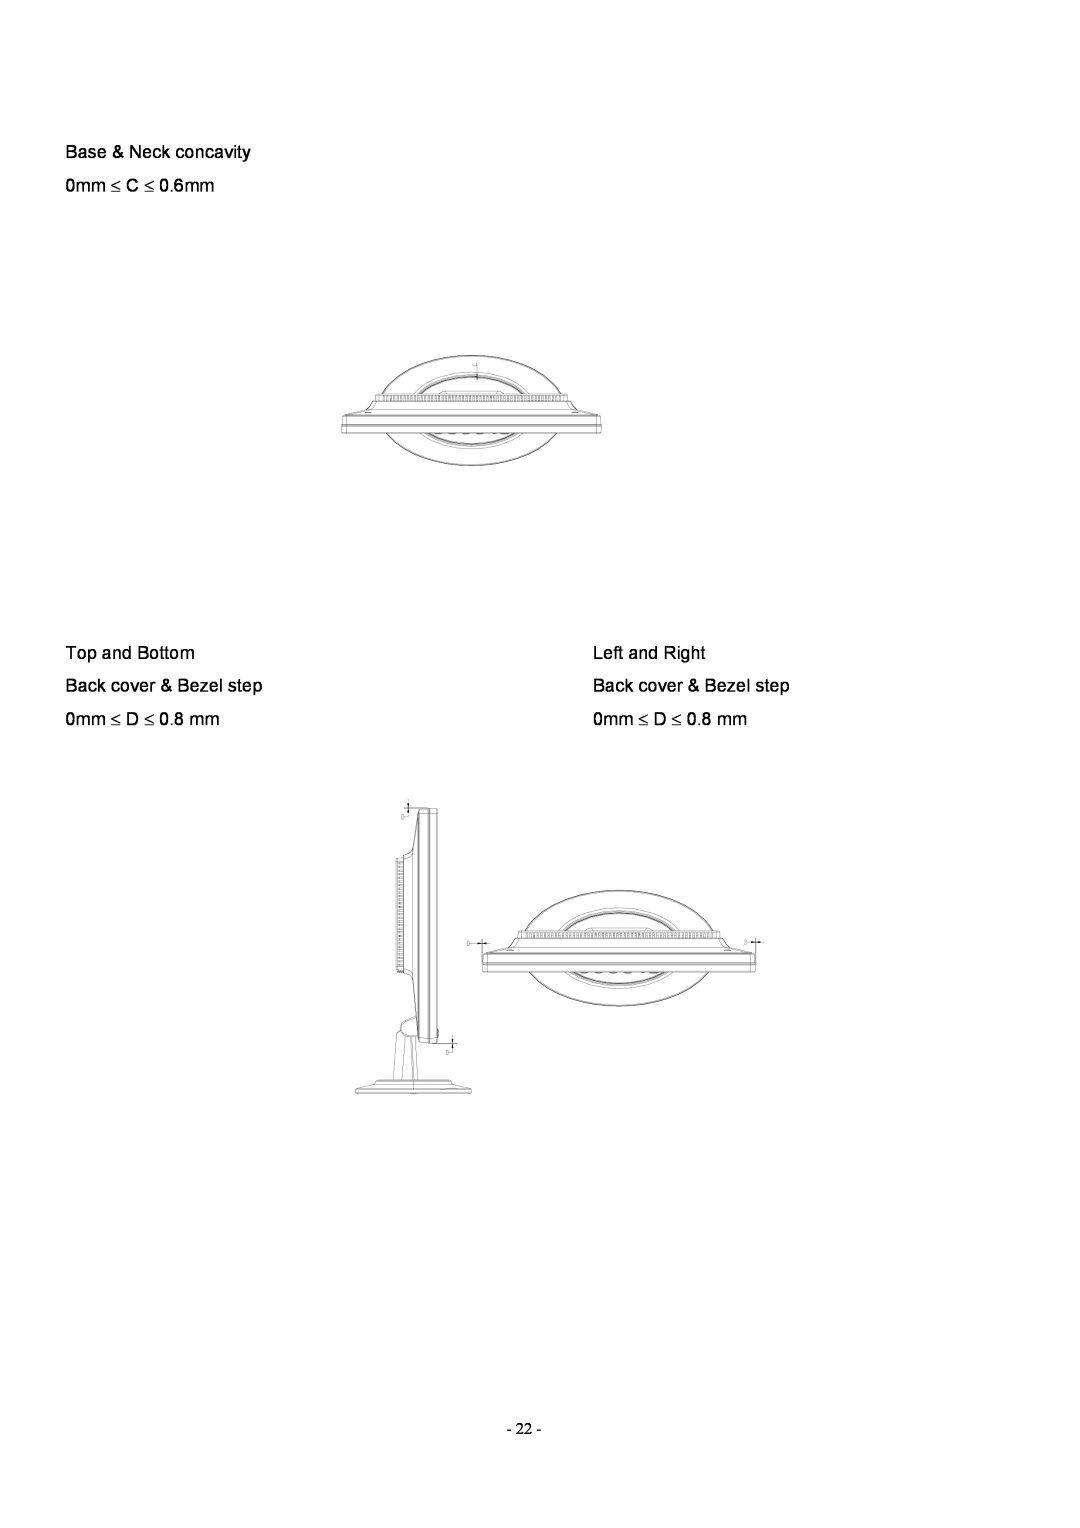 Acer AL1912 manual Base & Neck concavity 0mm ≤ C ≤ 0.6mm, Top and Bottom, Left and Right, Back cover & Bezel step 